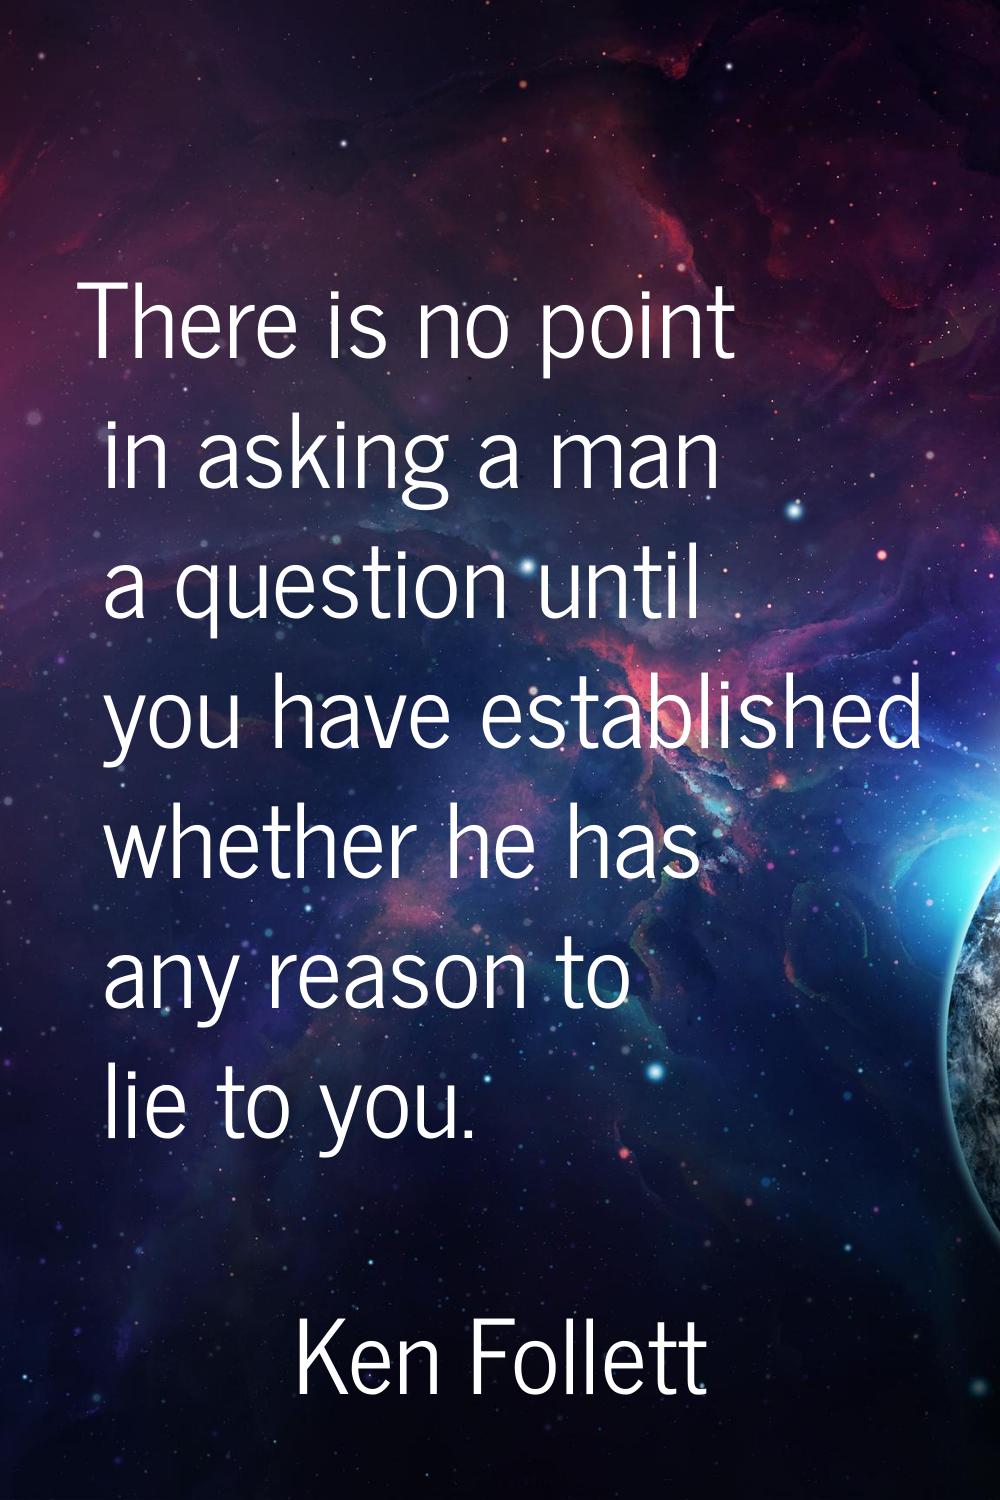 There is no point in asking a man a question until you have established whether he has any reason t